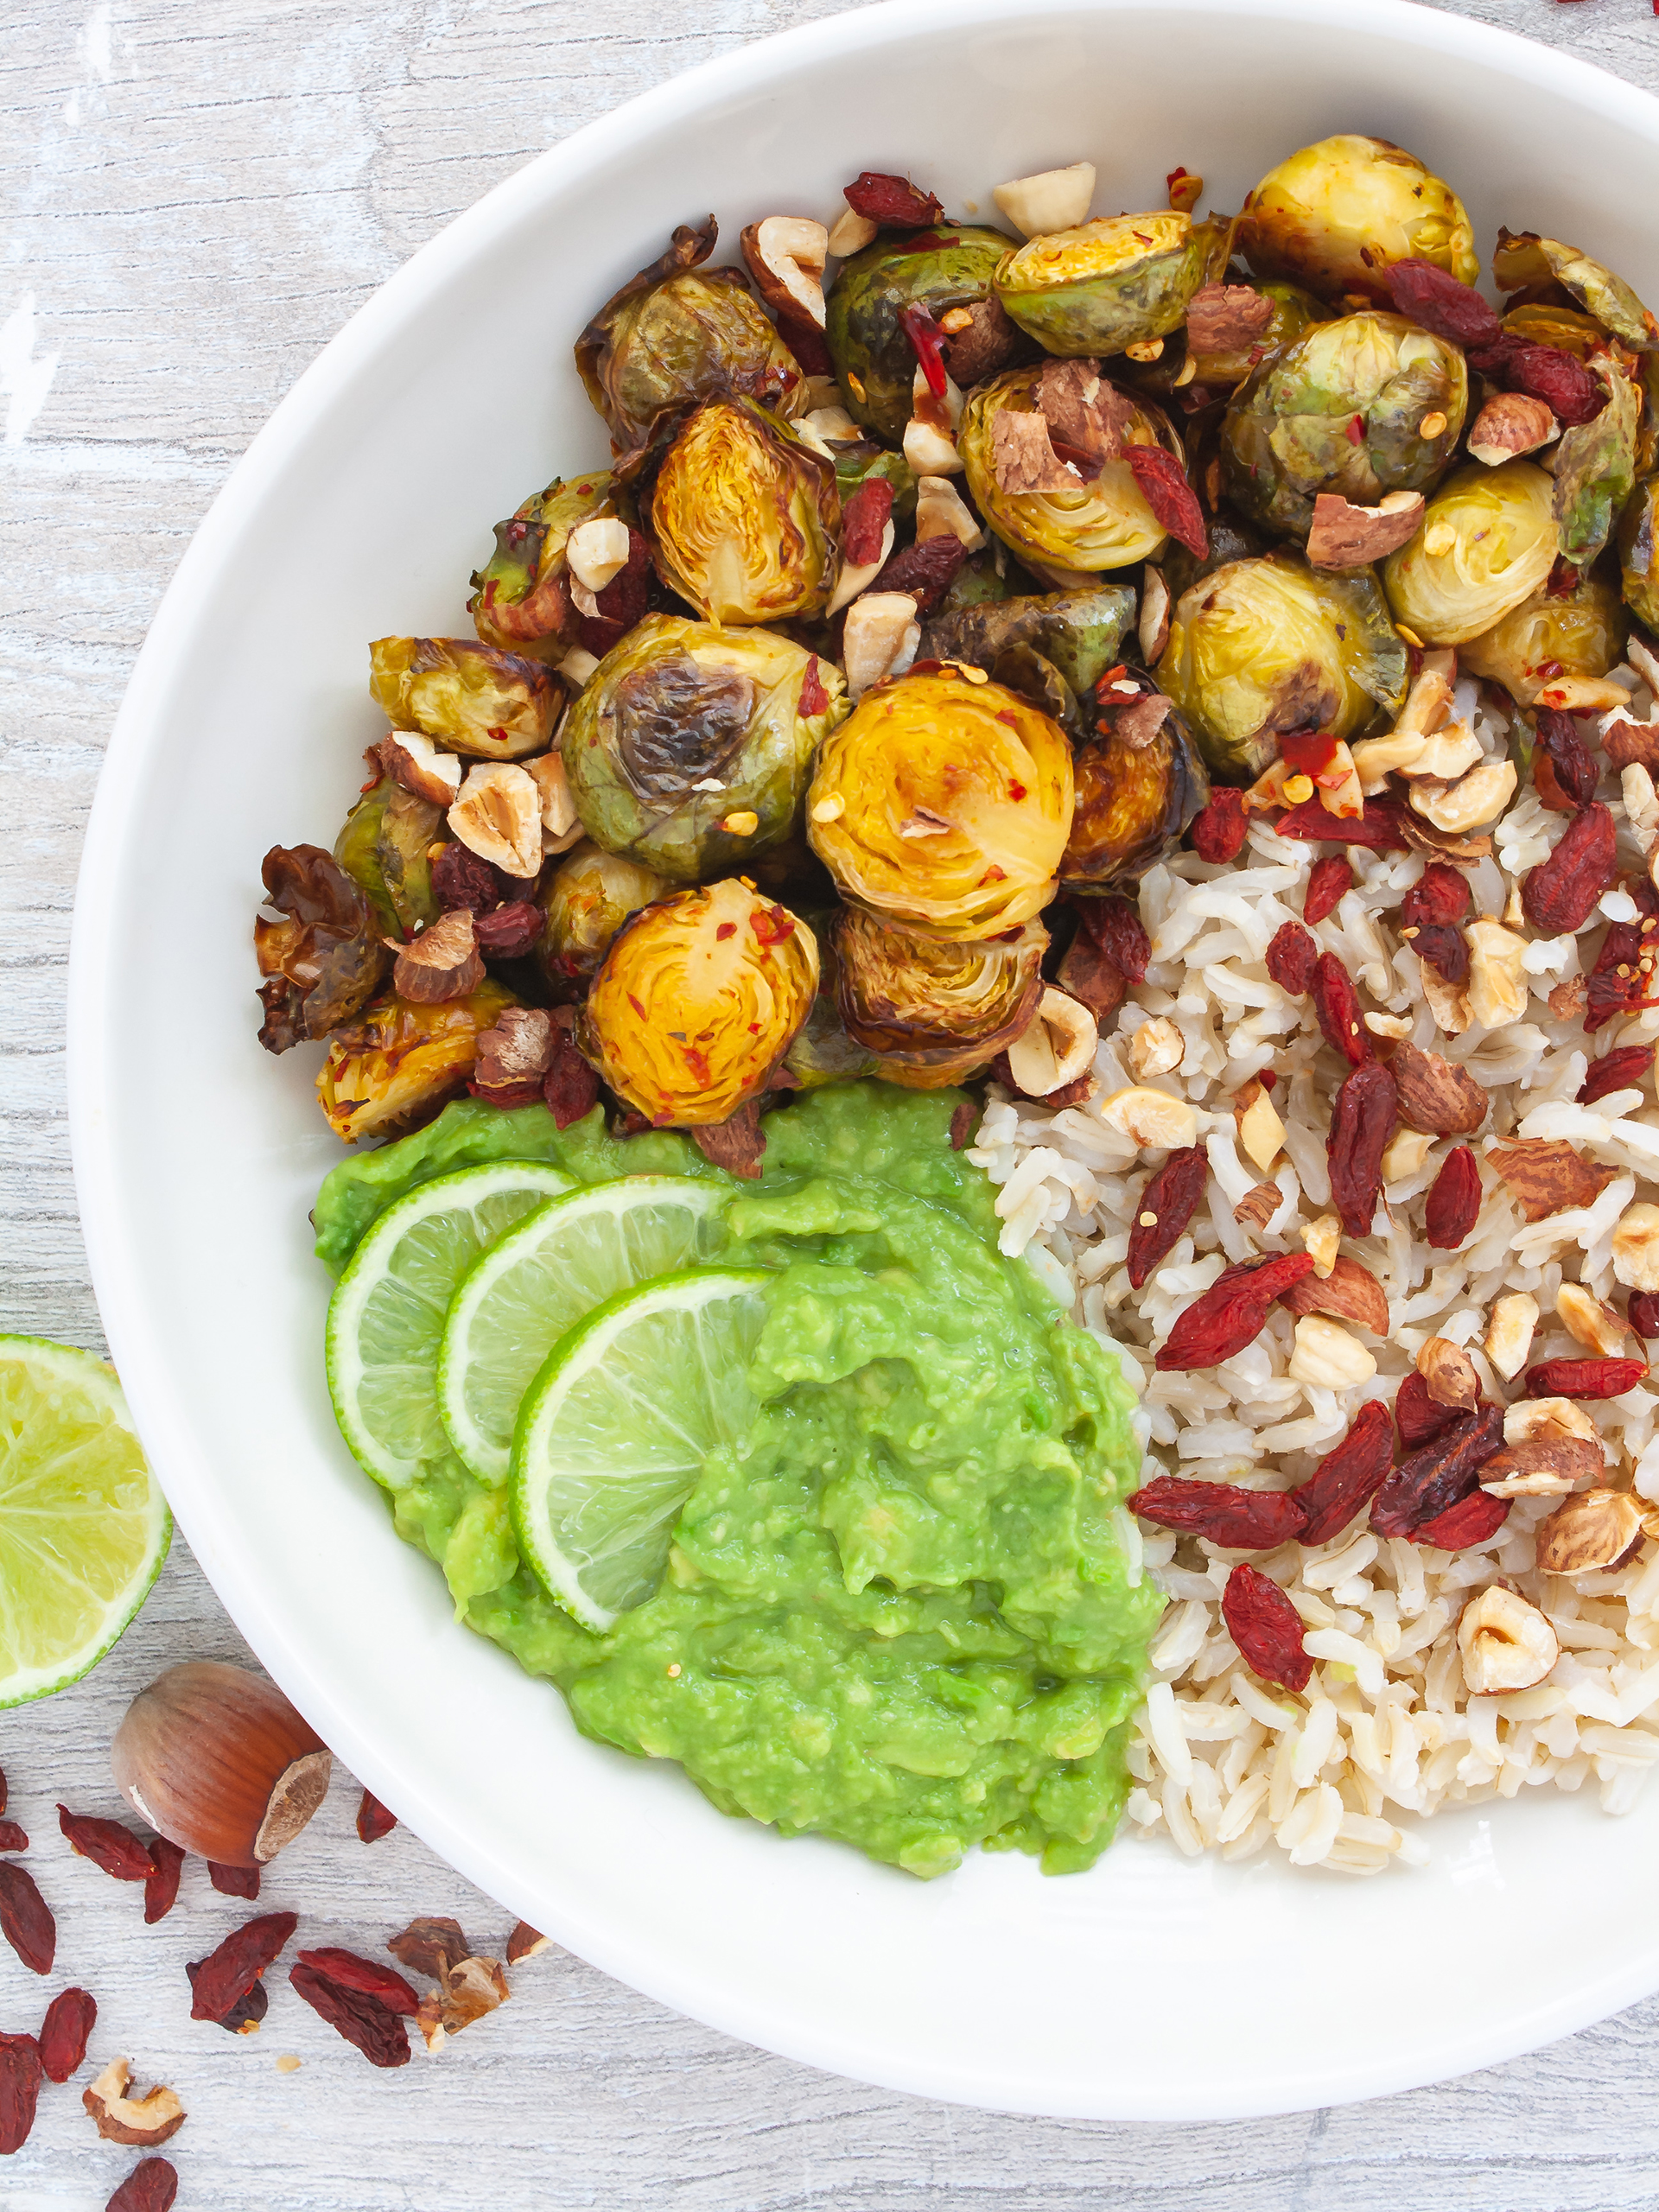 Chilli Lime Roasted Sprouts with Avocado Recipe